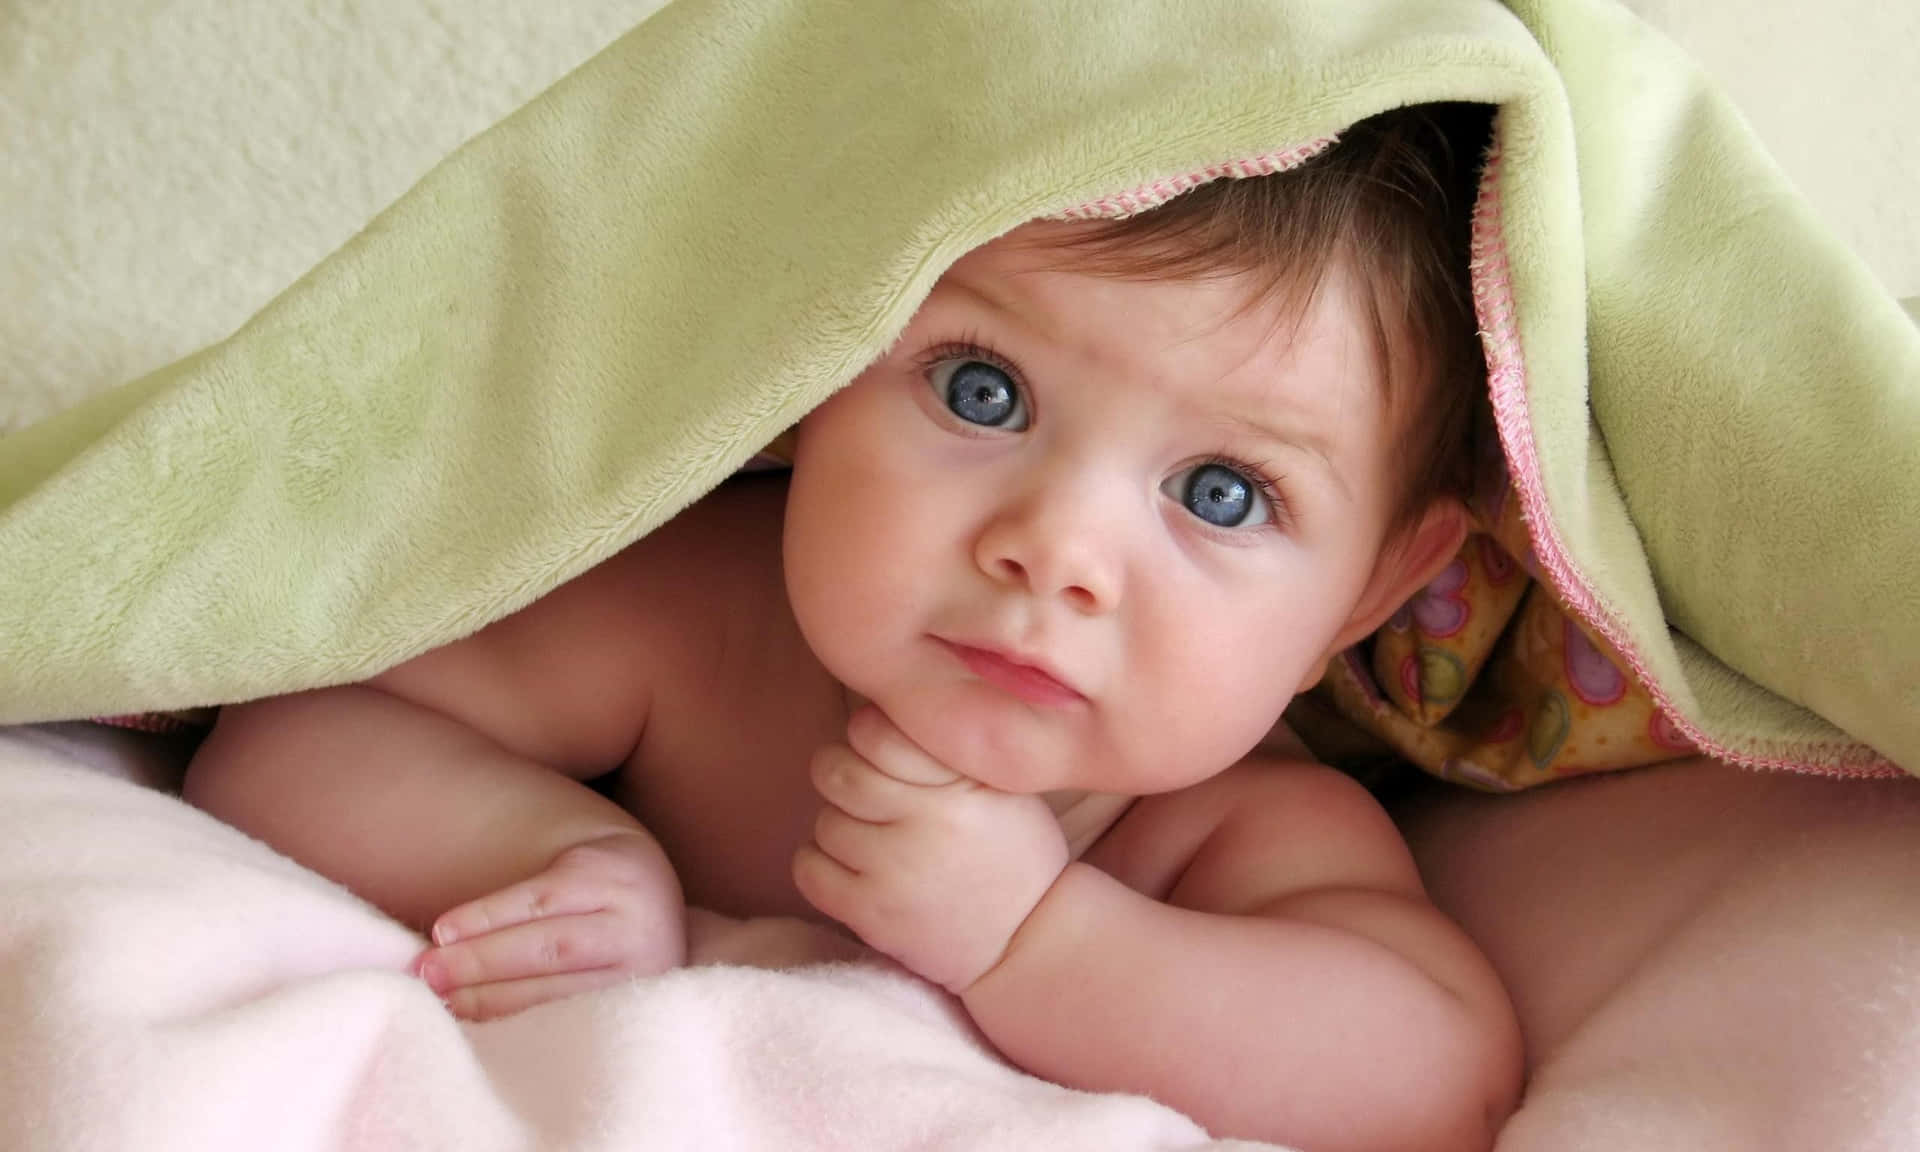 This baby girl looks like a real-life angel!